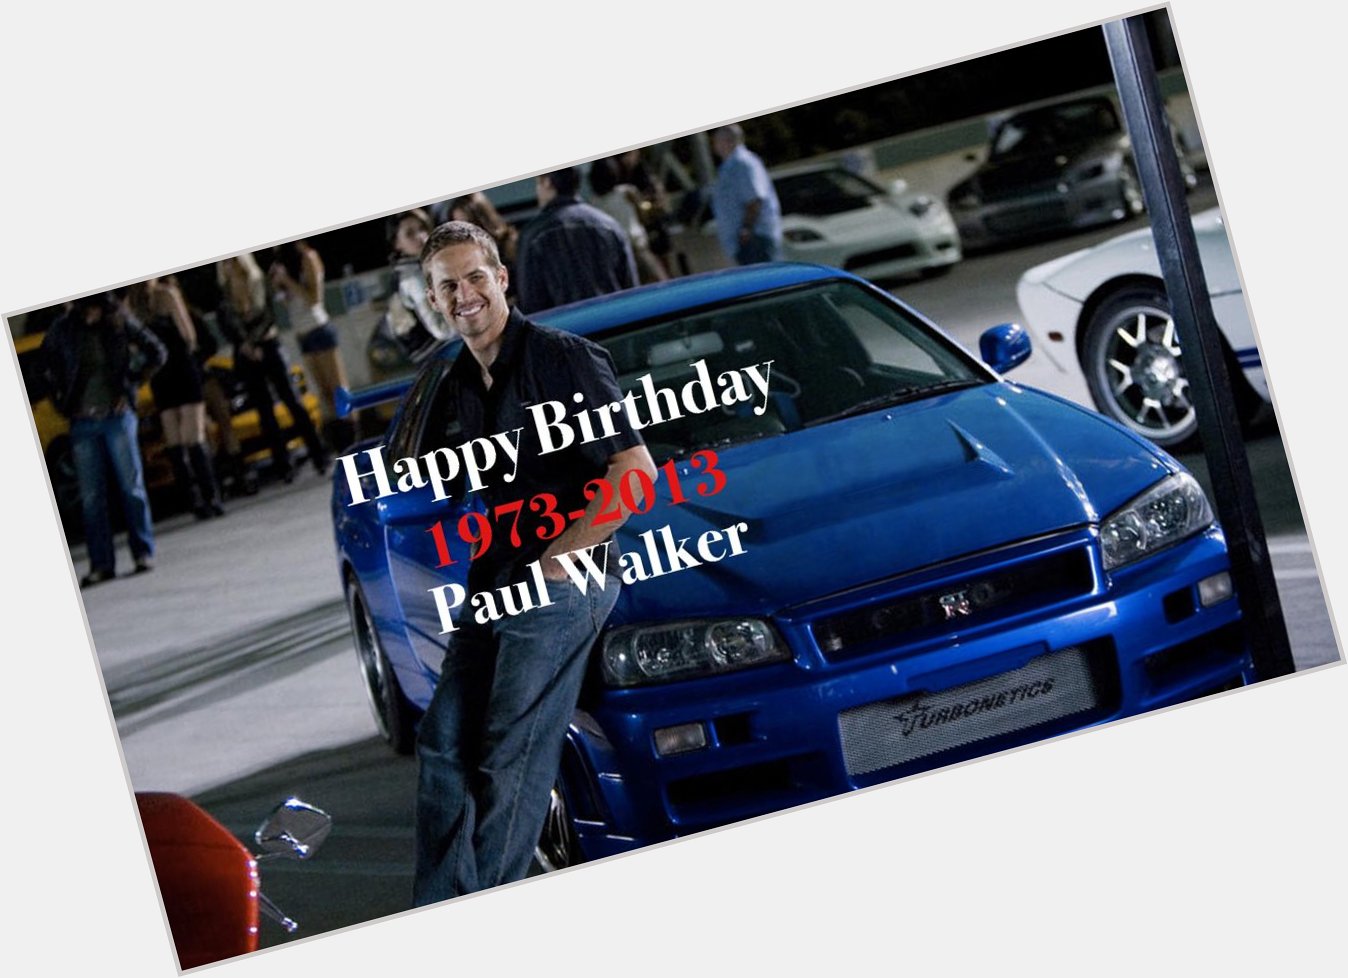 Happy Birthday, Paul Walker.

He would have turned 44 years old today. 

Rest In Peace... 